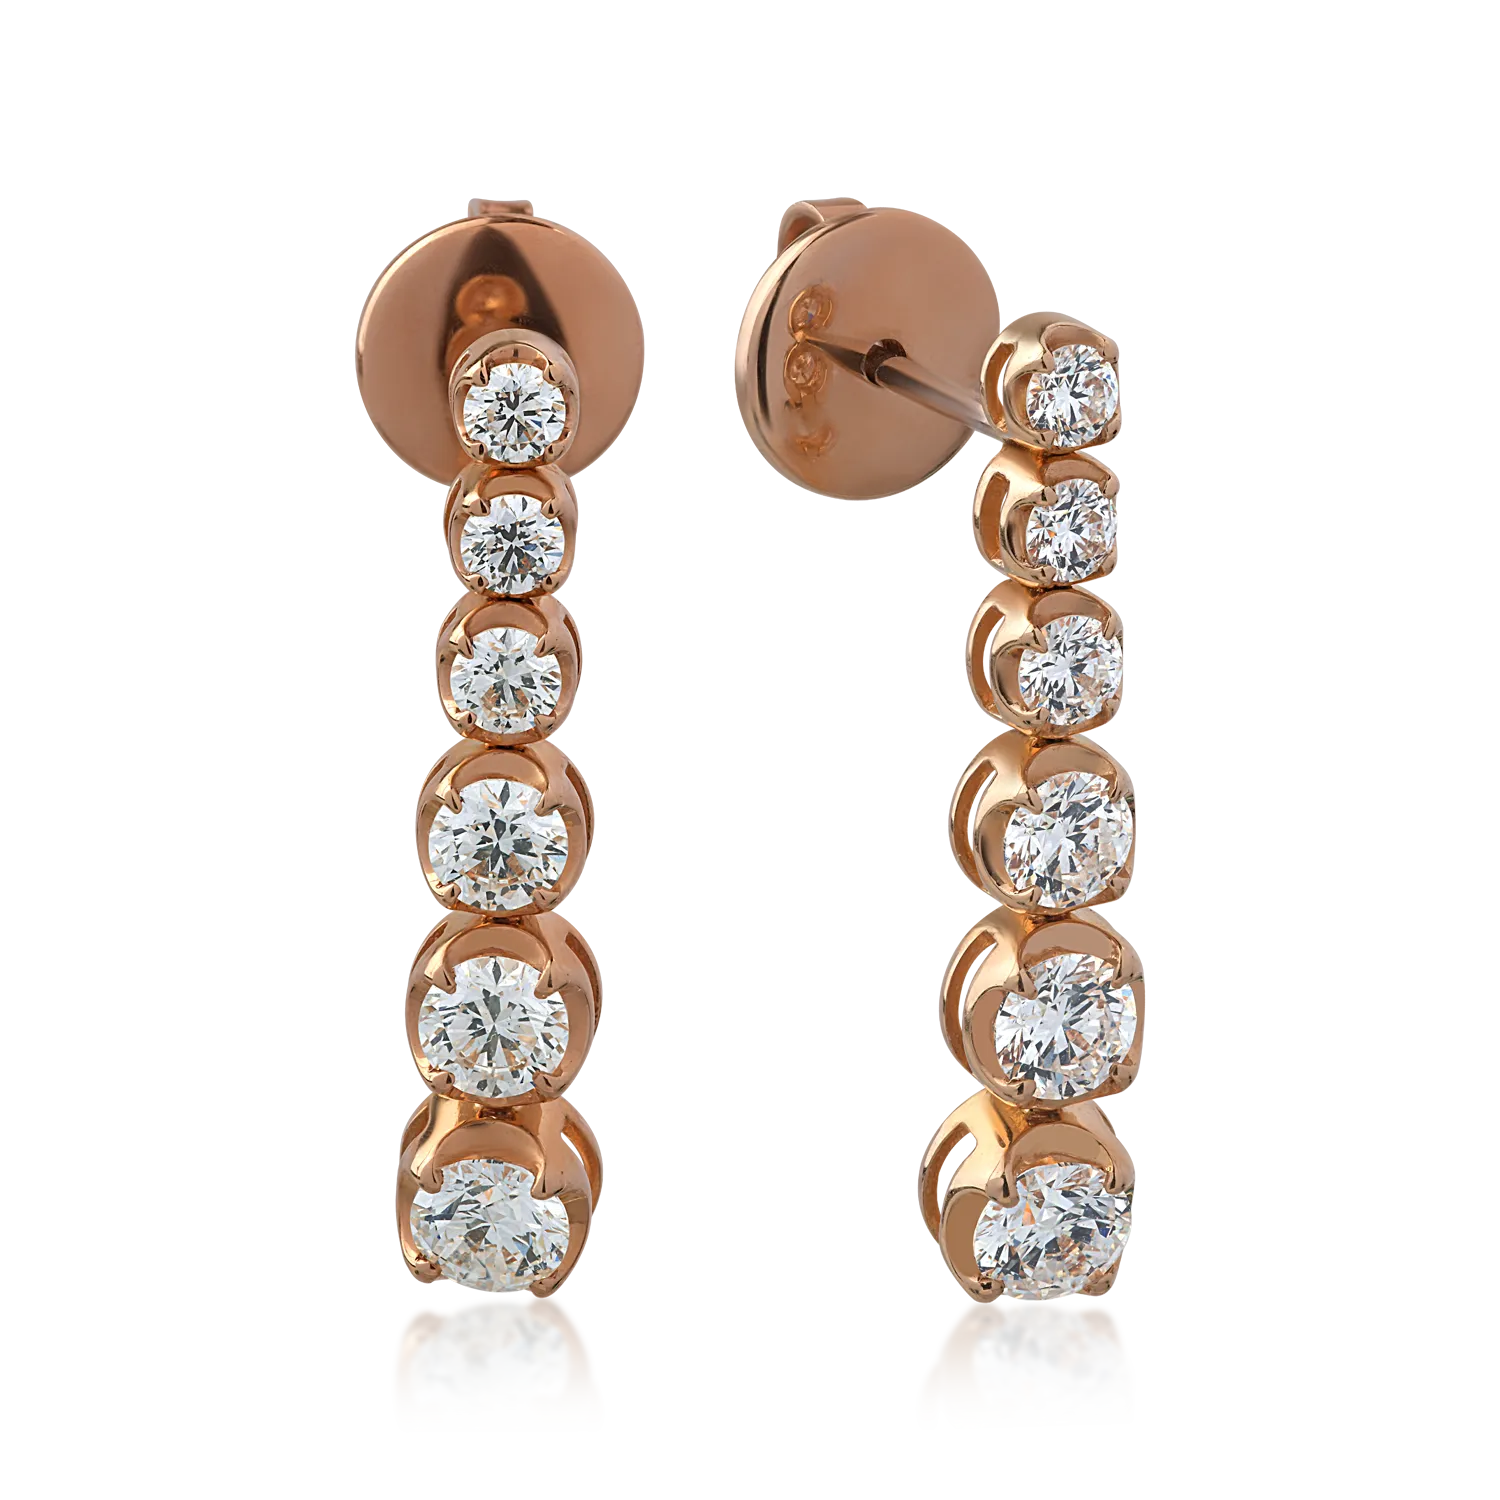 18K rose gold earrings with 1.15ct diamonds